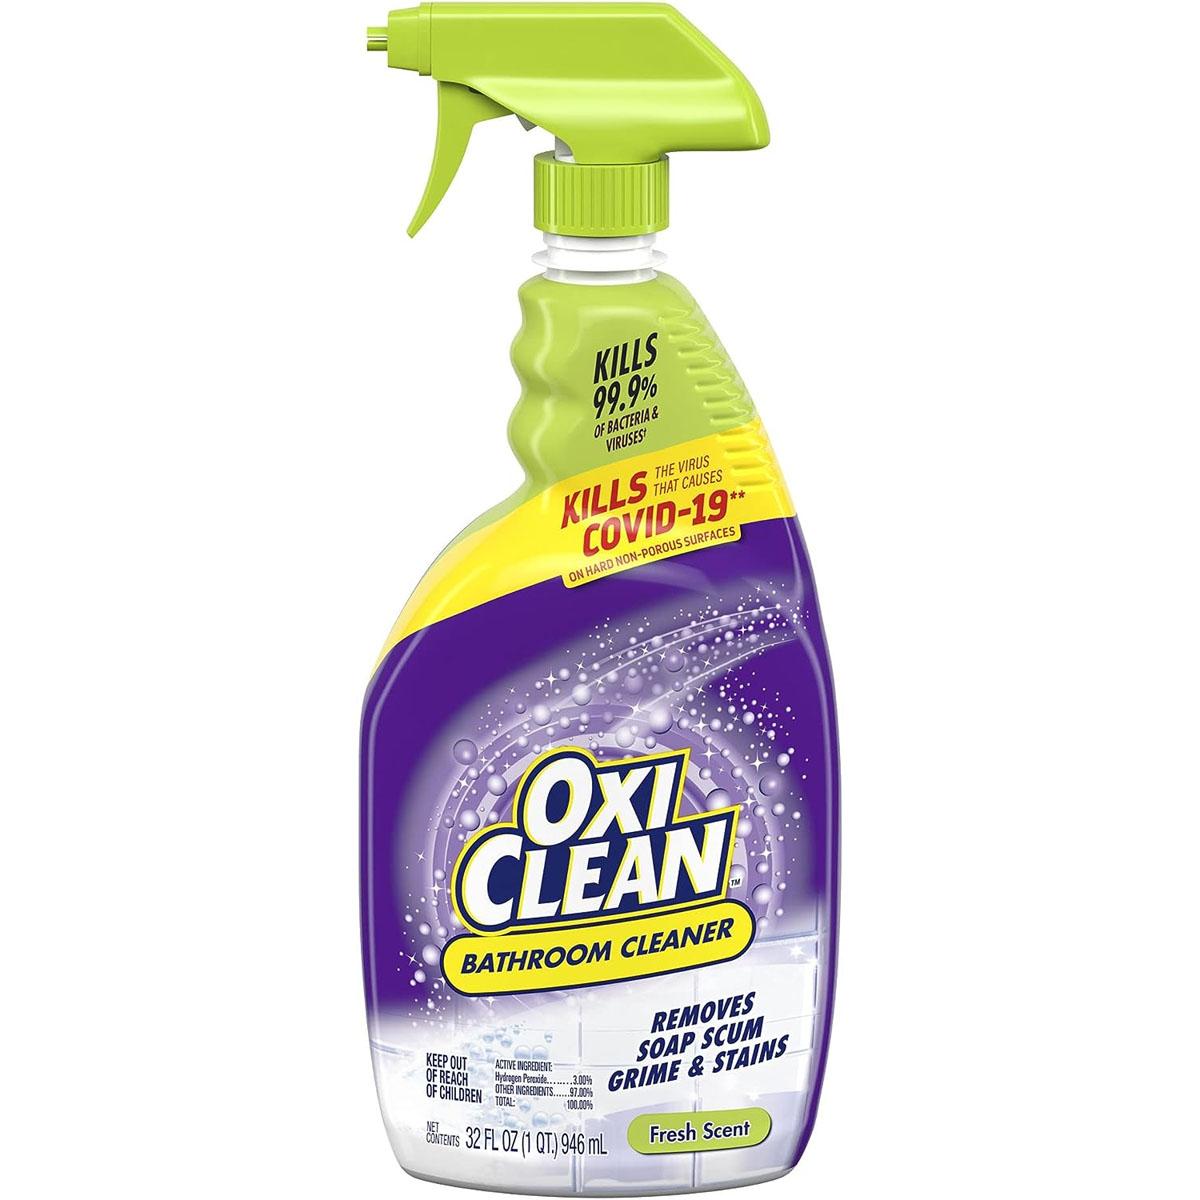 Kaboom OxiClean Bathroom Cleaner Spray for $2.50